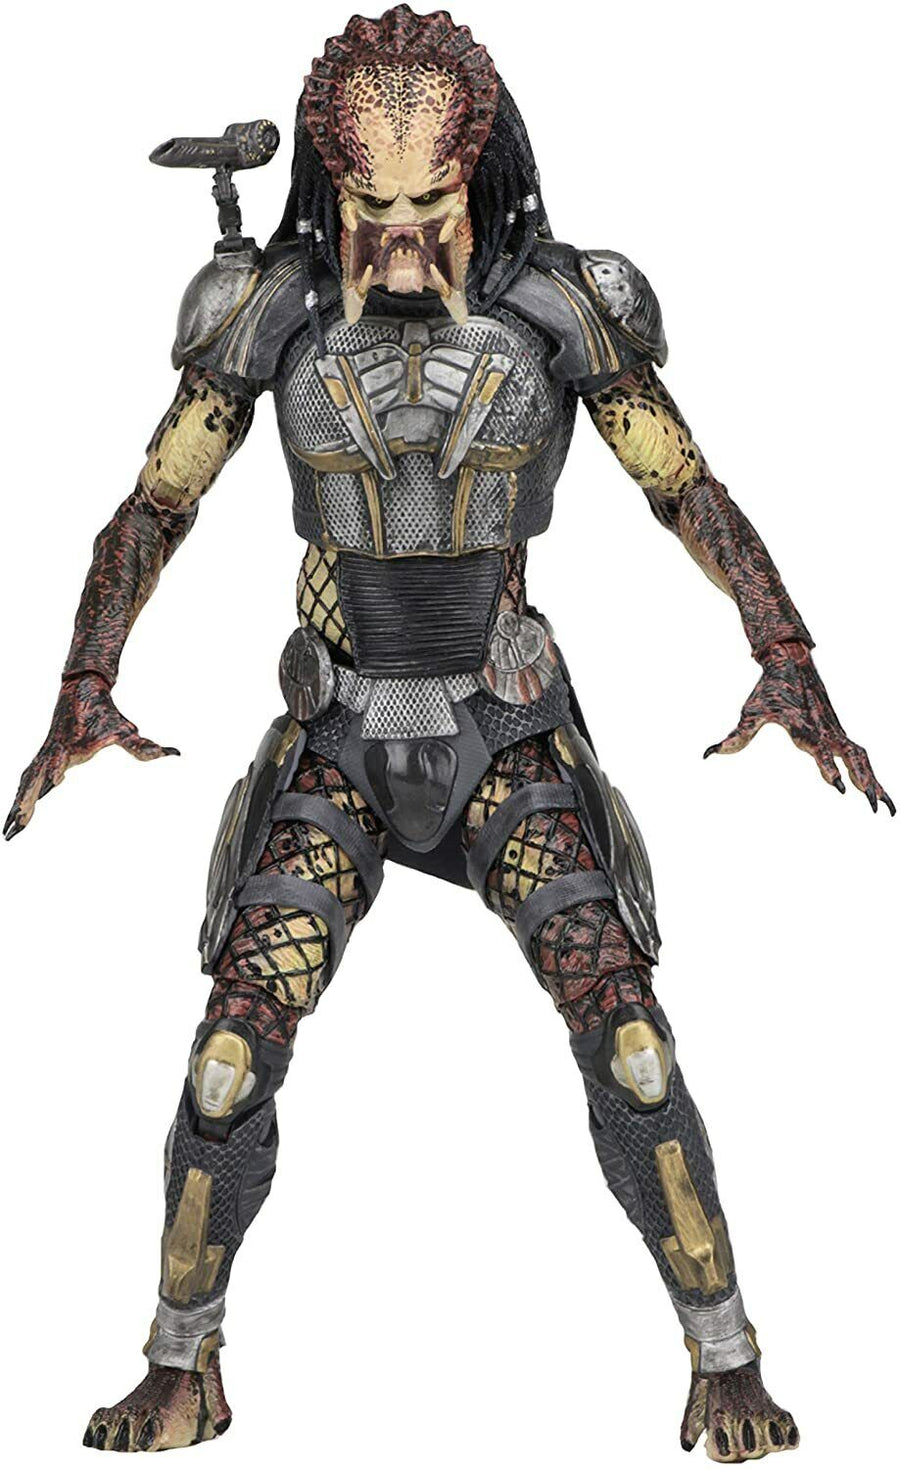 NECA OFFICIAL Ultimate Fugitive Predator 2018 Action Figure - (NEW BOXED)